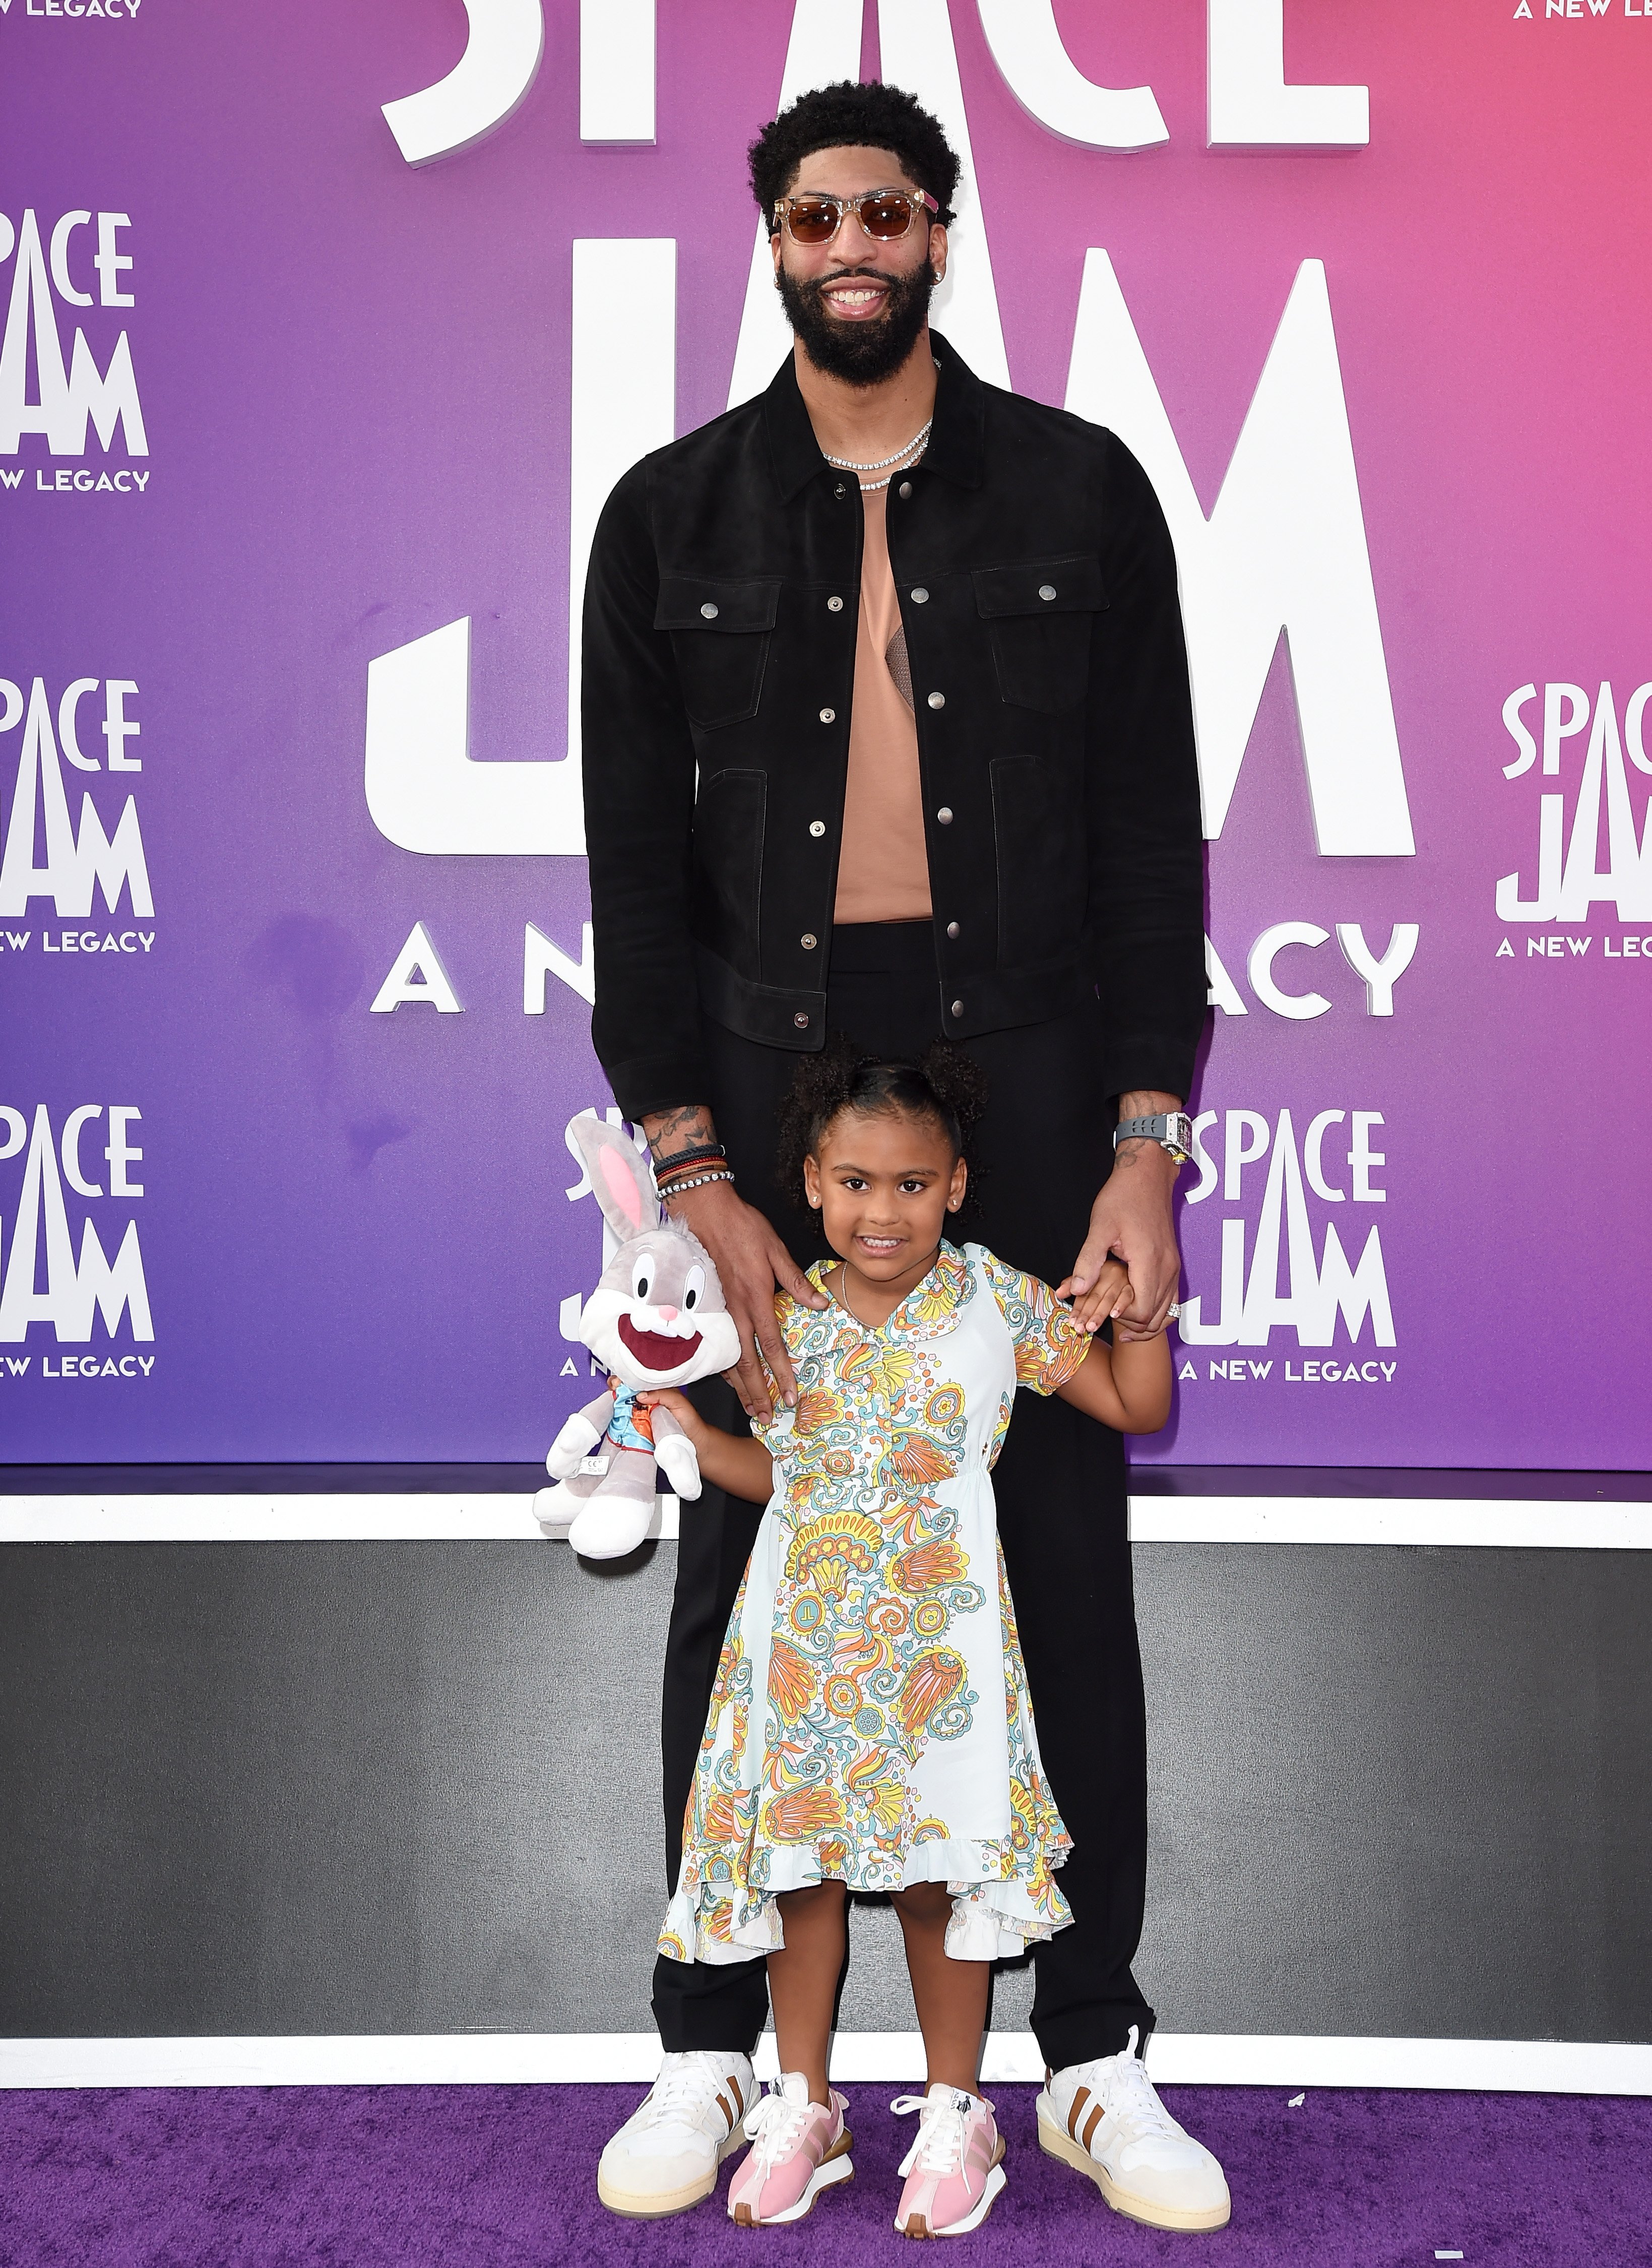 Anthony Davis and Nala Davis pose at the Premiere of Warner Bros "Space Jam: A New Legacy" at Regal LA Live on July 12, 2021, in Los Angeles. | Source: Getty Images